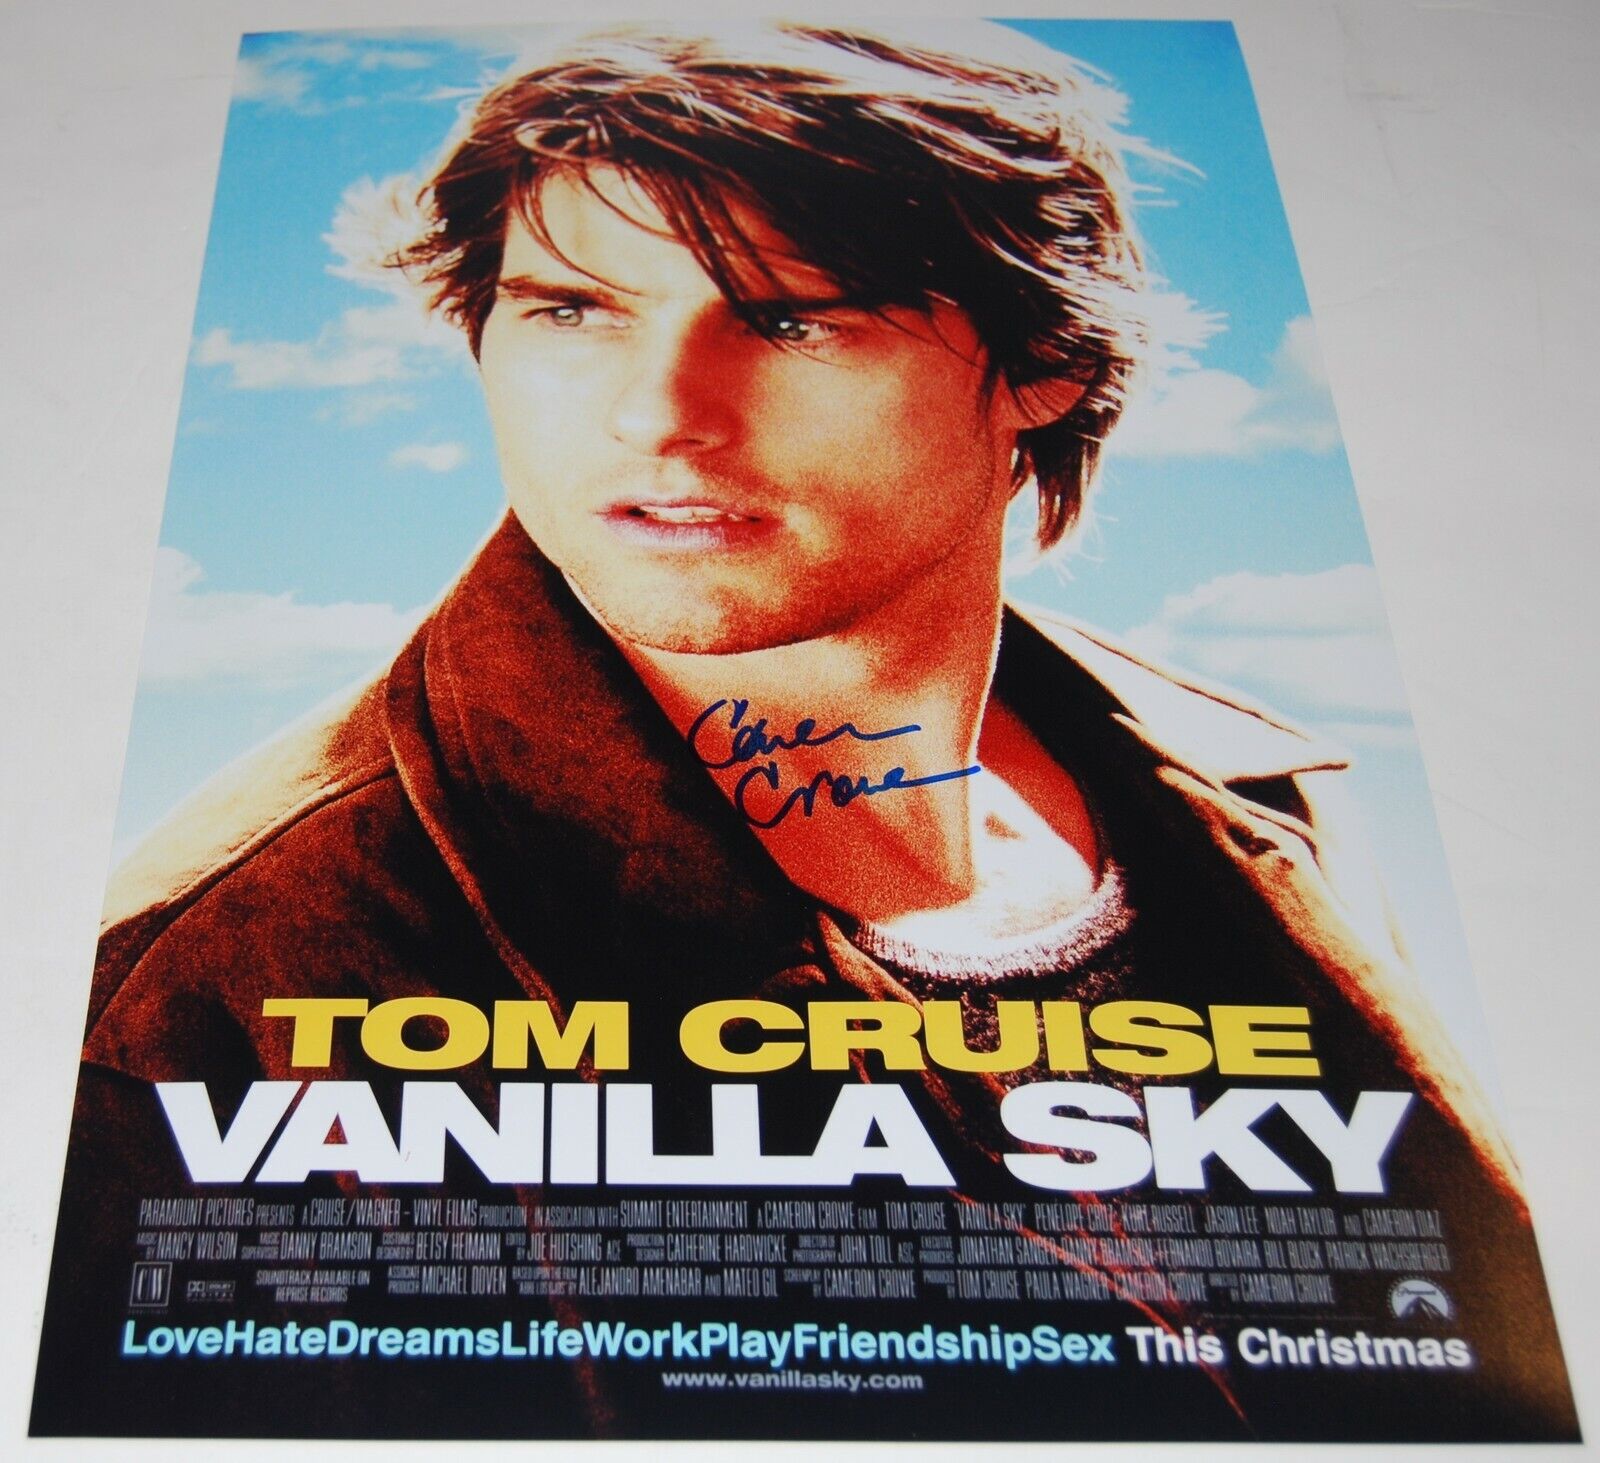 CAMERON CROWE signed (VANILLA SKY) 12X18 movie poster Photo Poster painting *DIRECTOR* W/COA